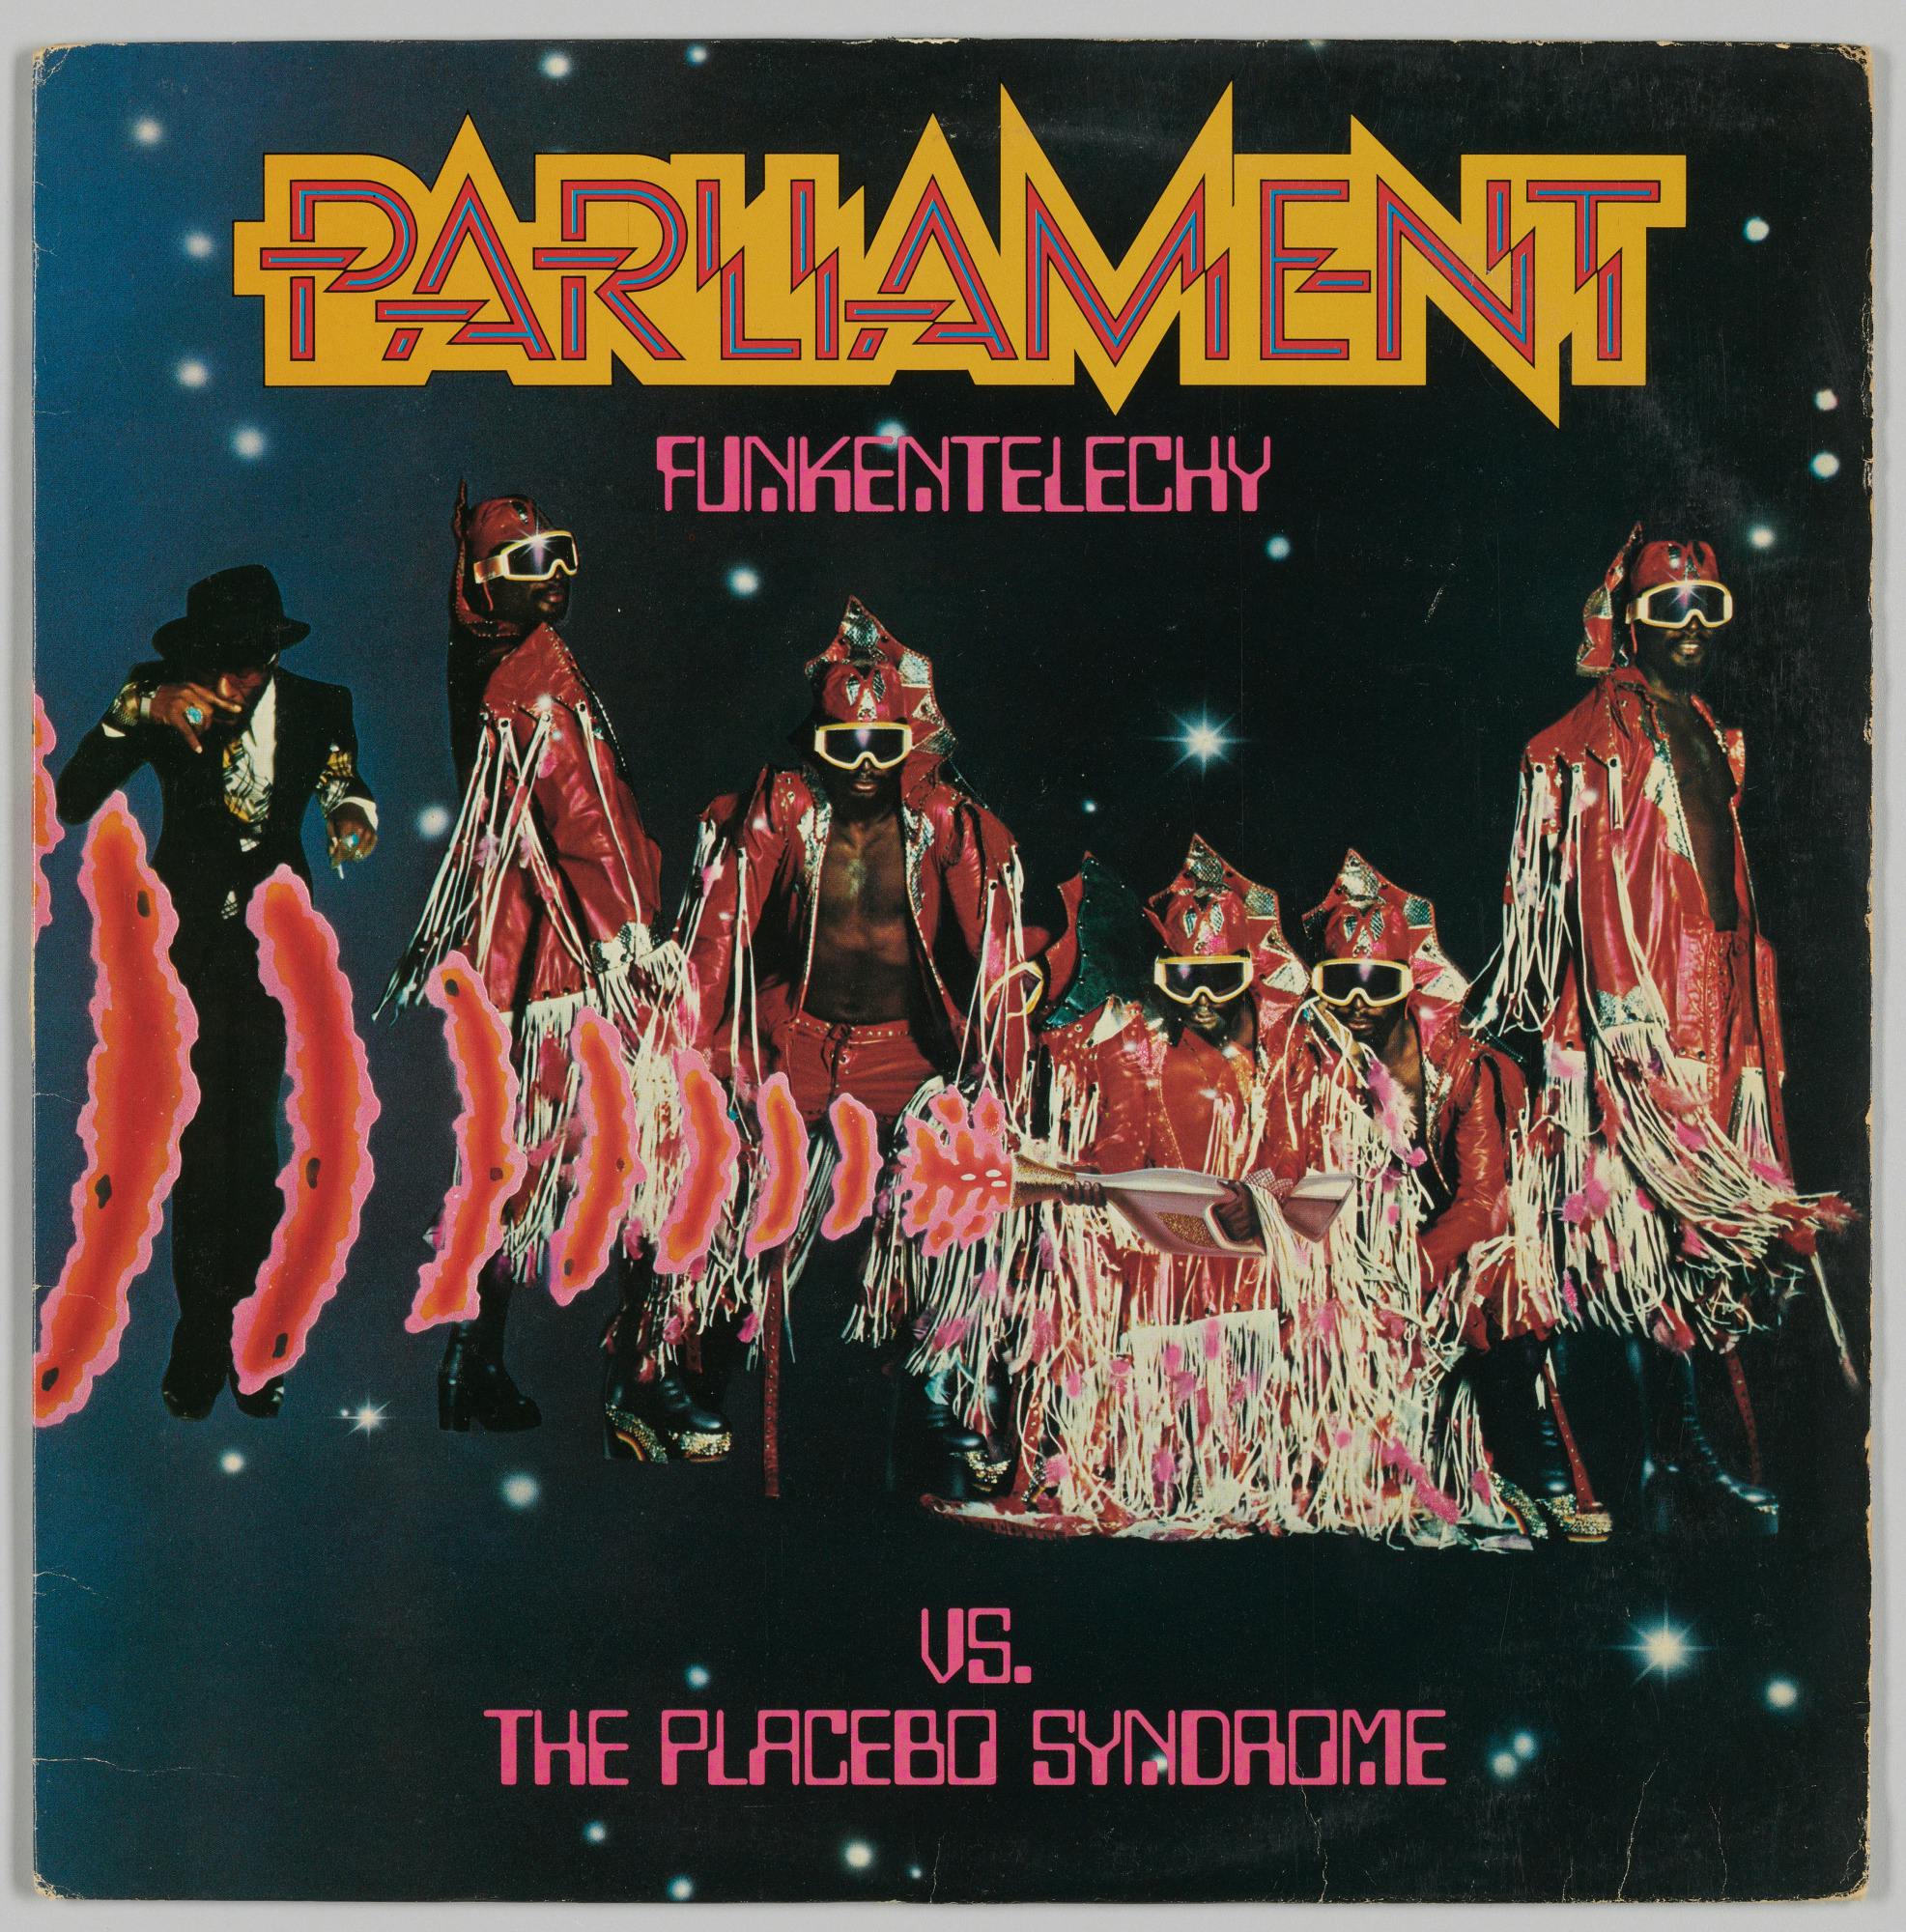 Album cover with men in glasses and red clothing. Text reads "Parliament Funkentelechy Vs. The Placebo Syndrome"